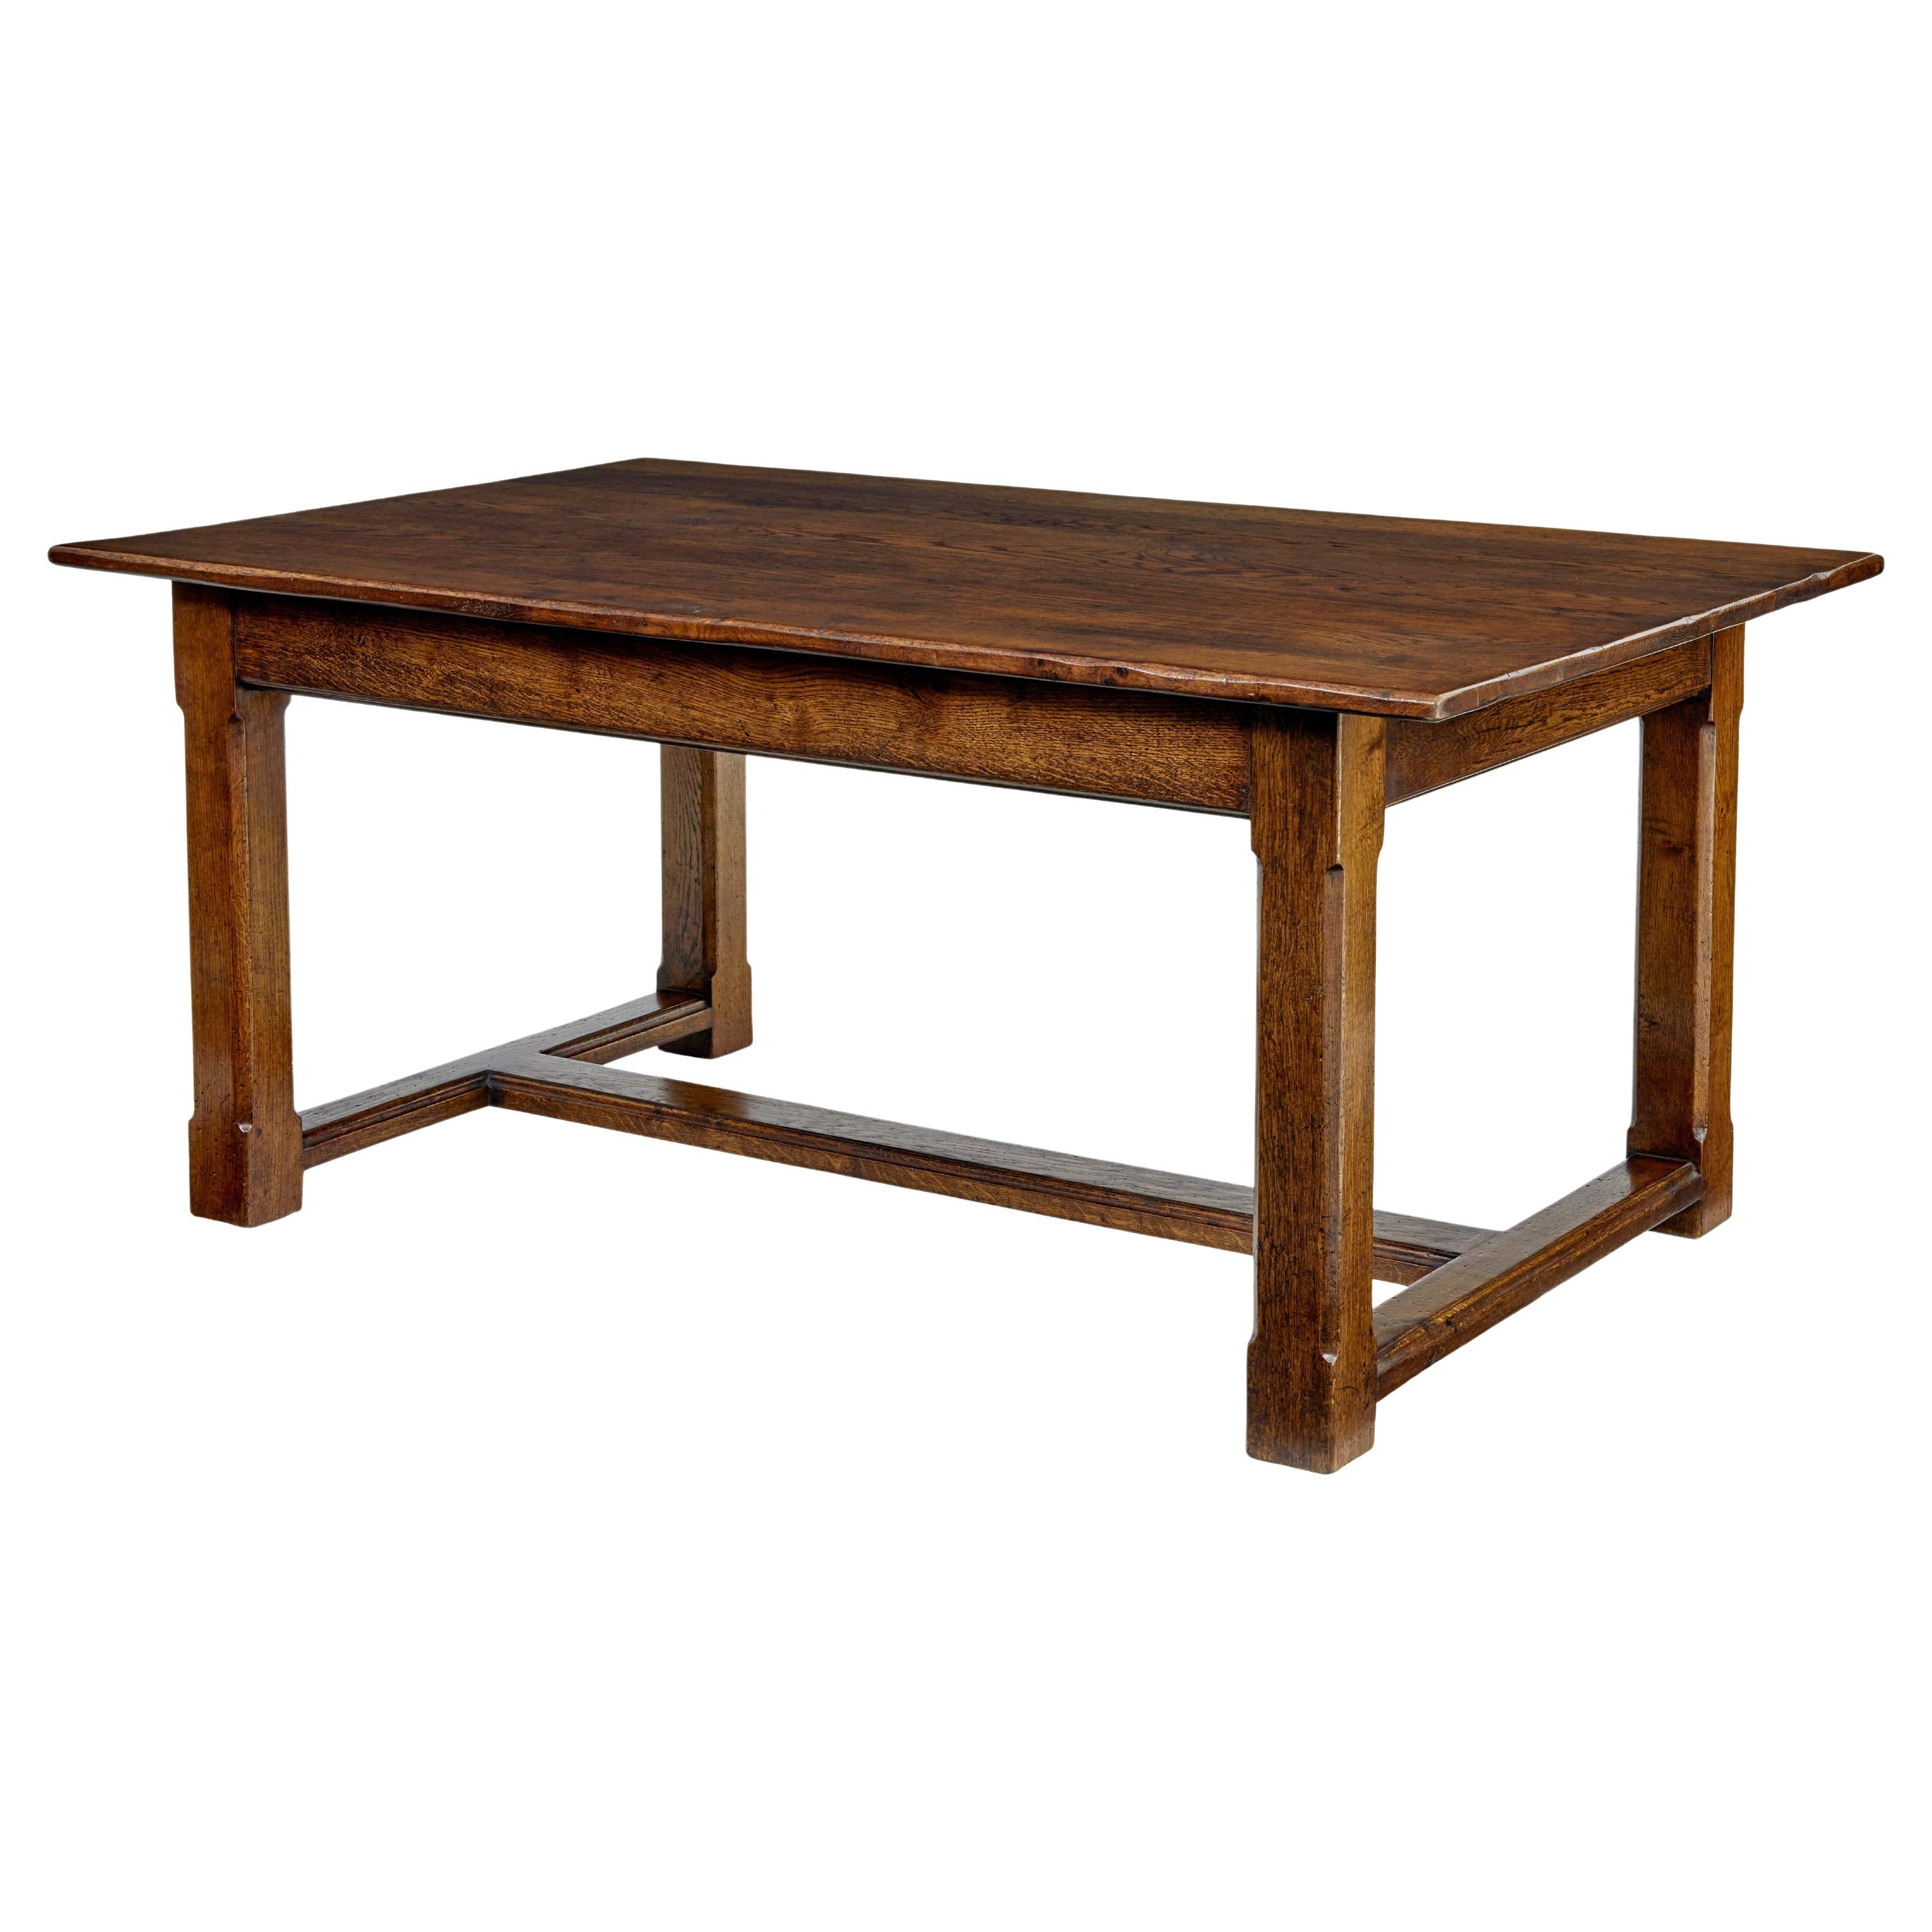 Late 20th century solid oak refectory table